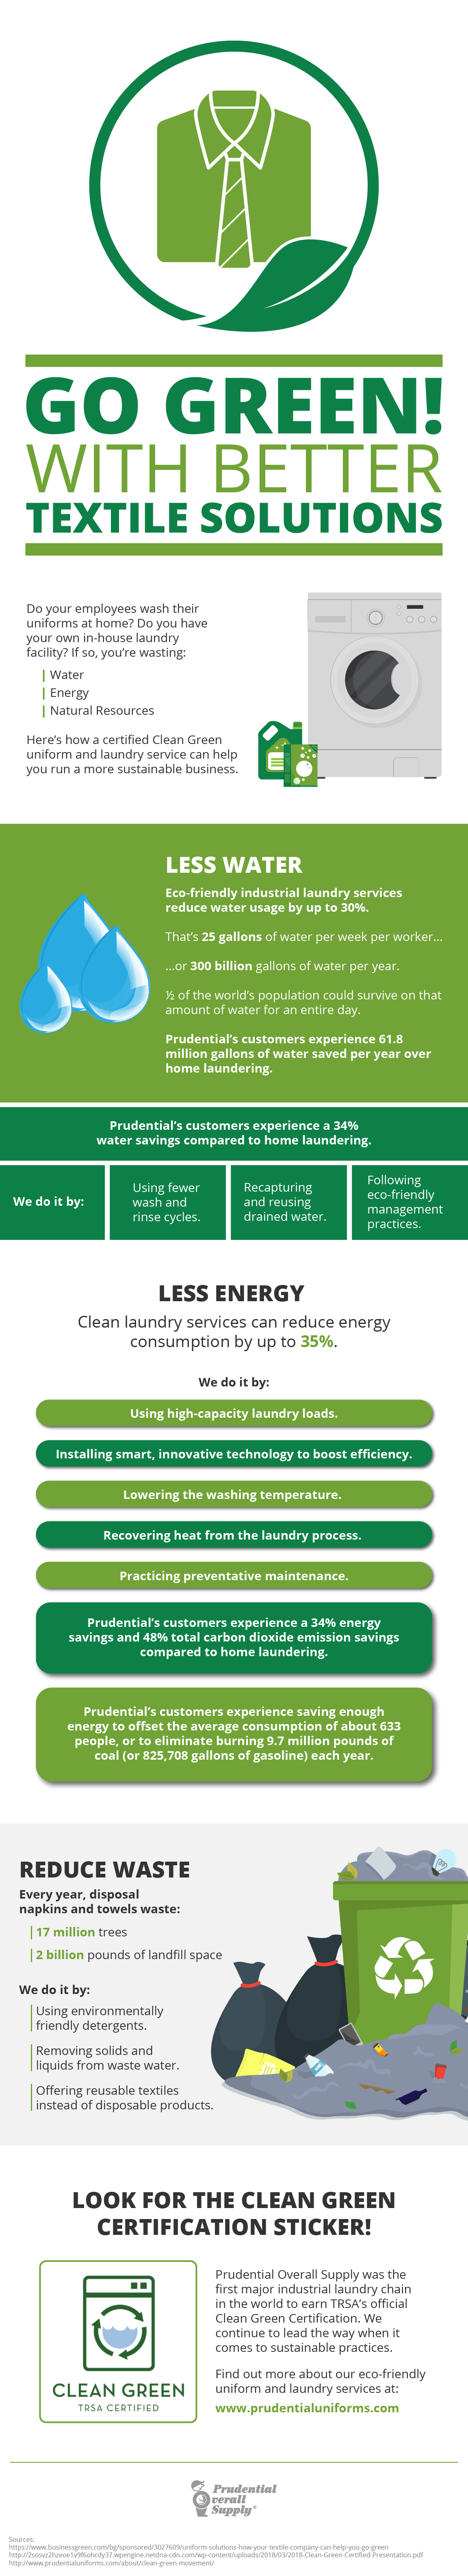 Infographic_Go Green - With Better Textile Solutions